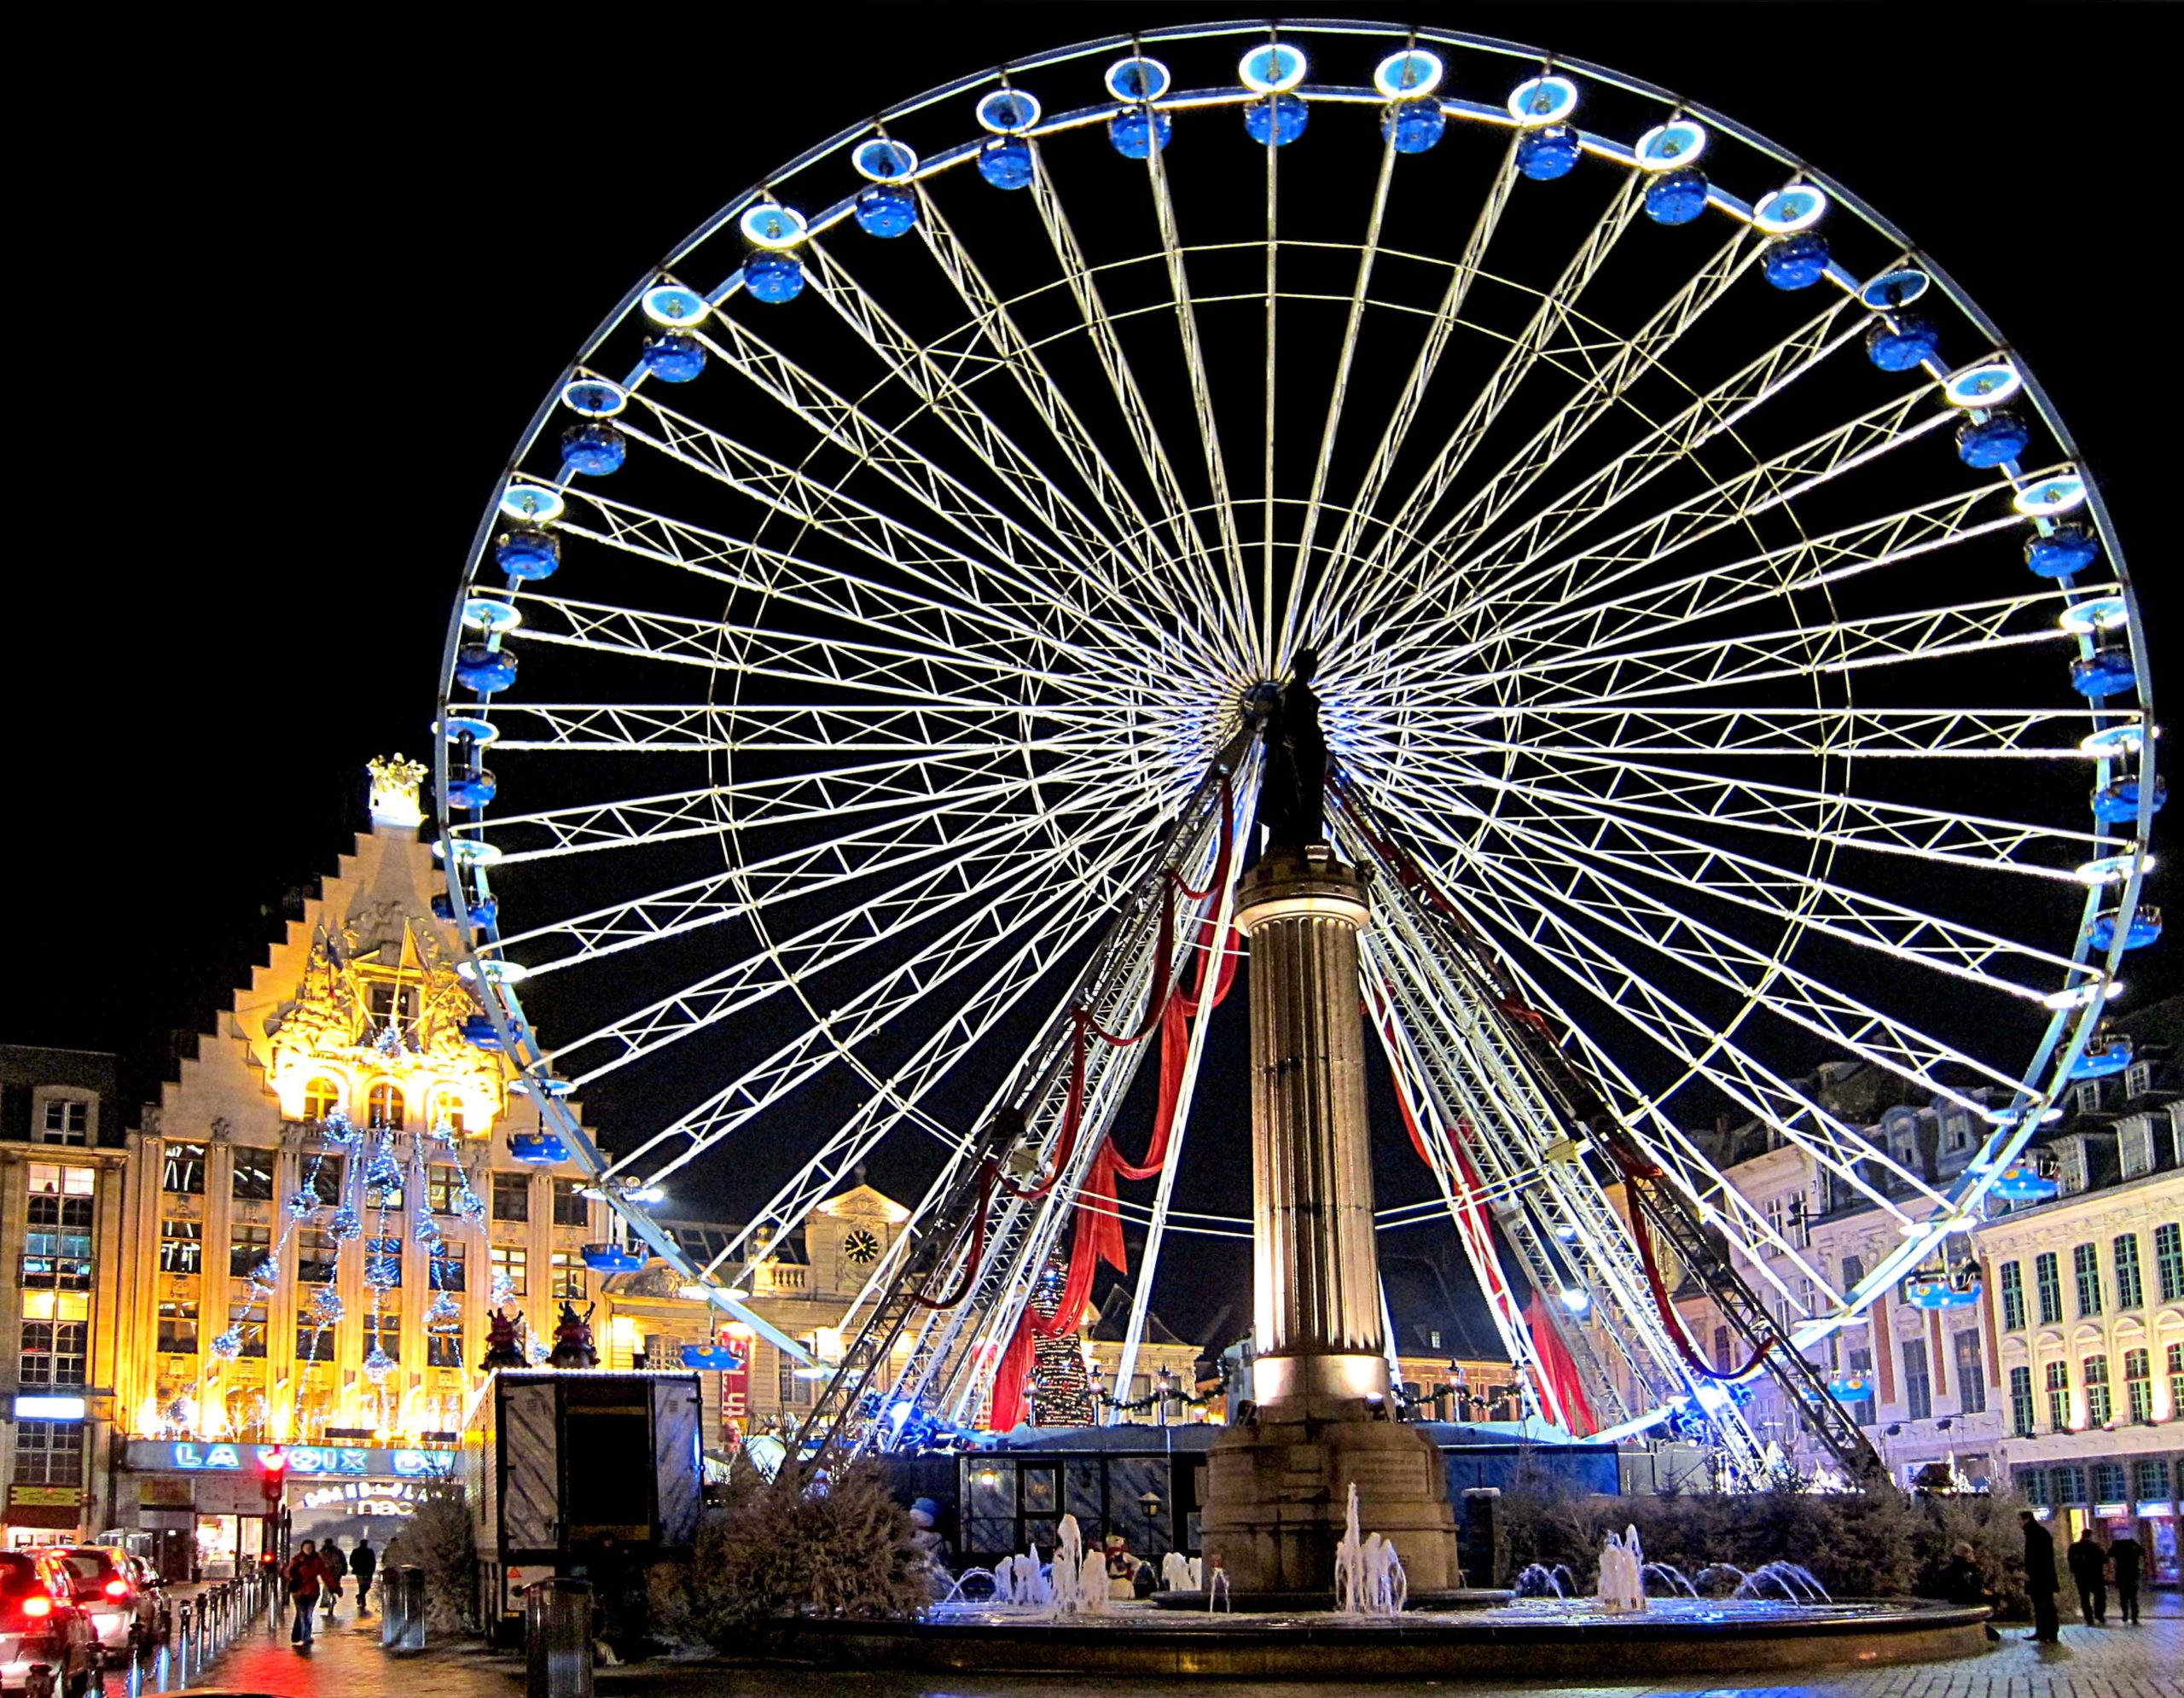 Lille Christmas Market © Velvet - licence [CC BY-SA 3.0] from Wikimedia Commons